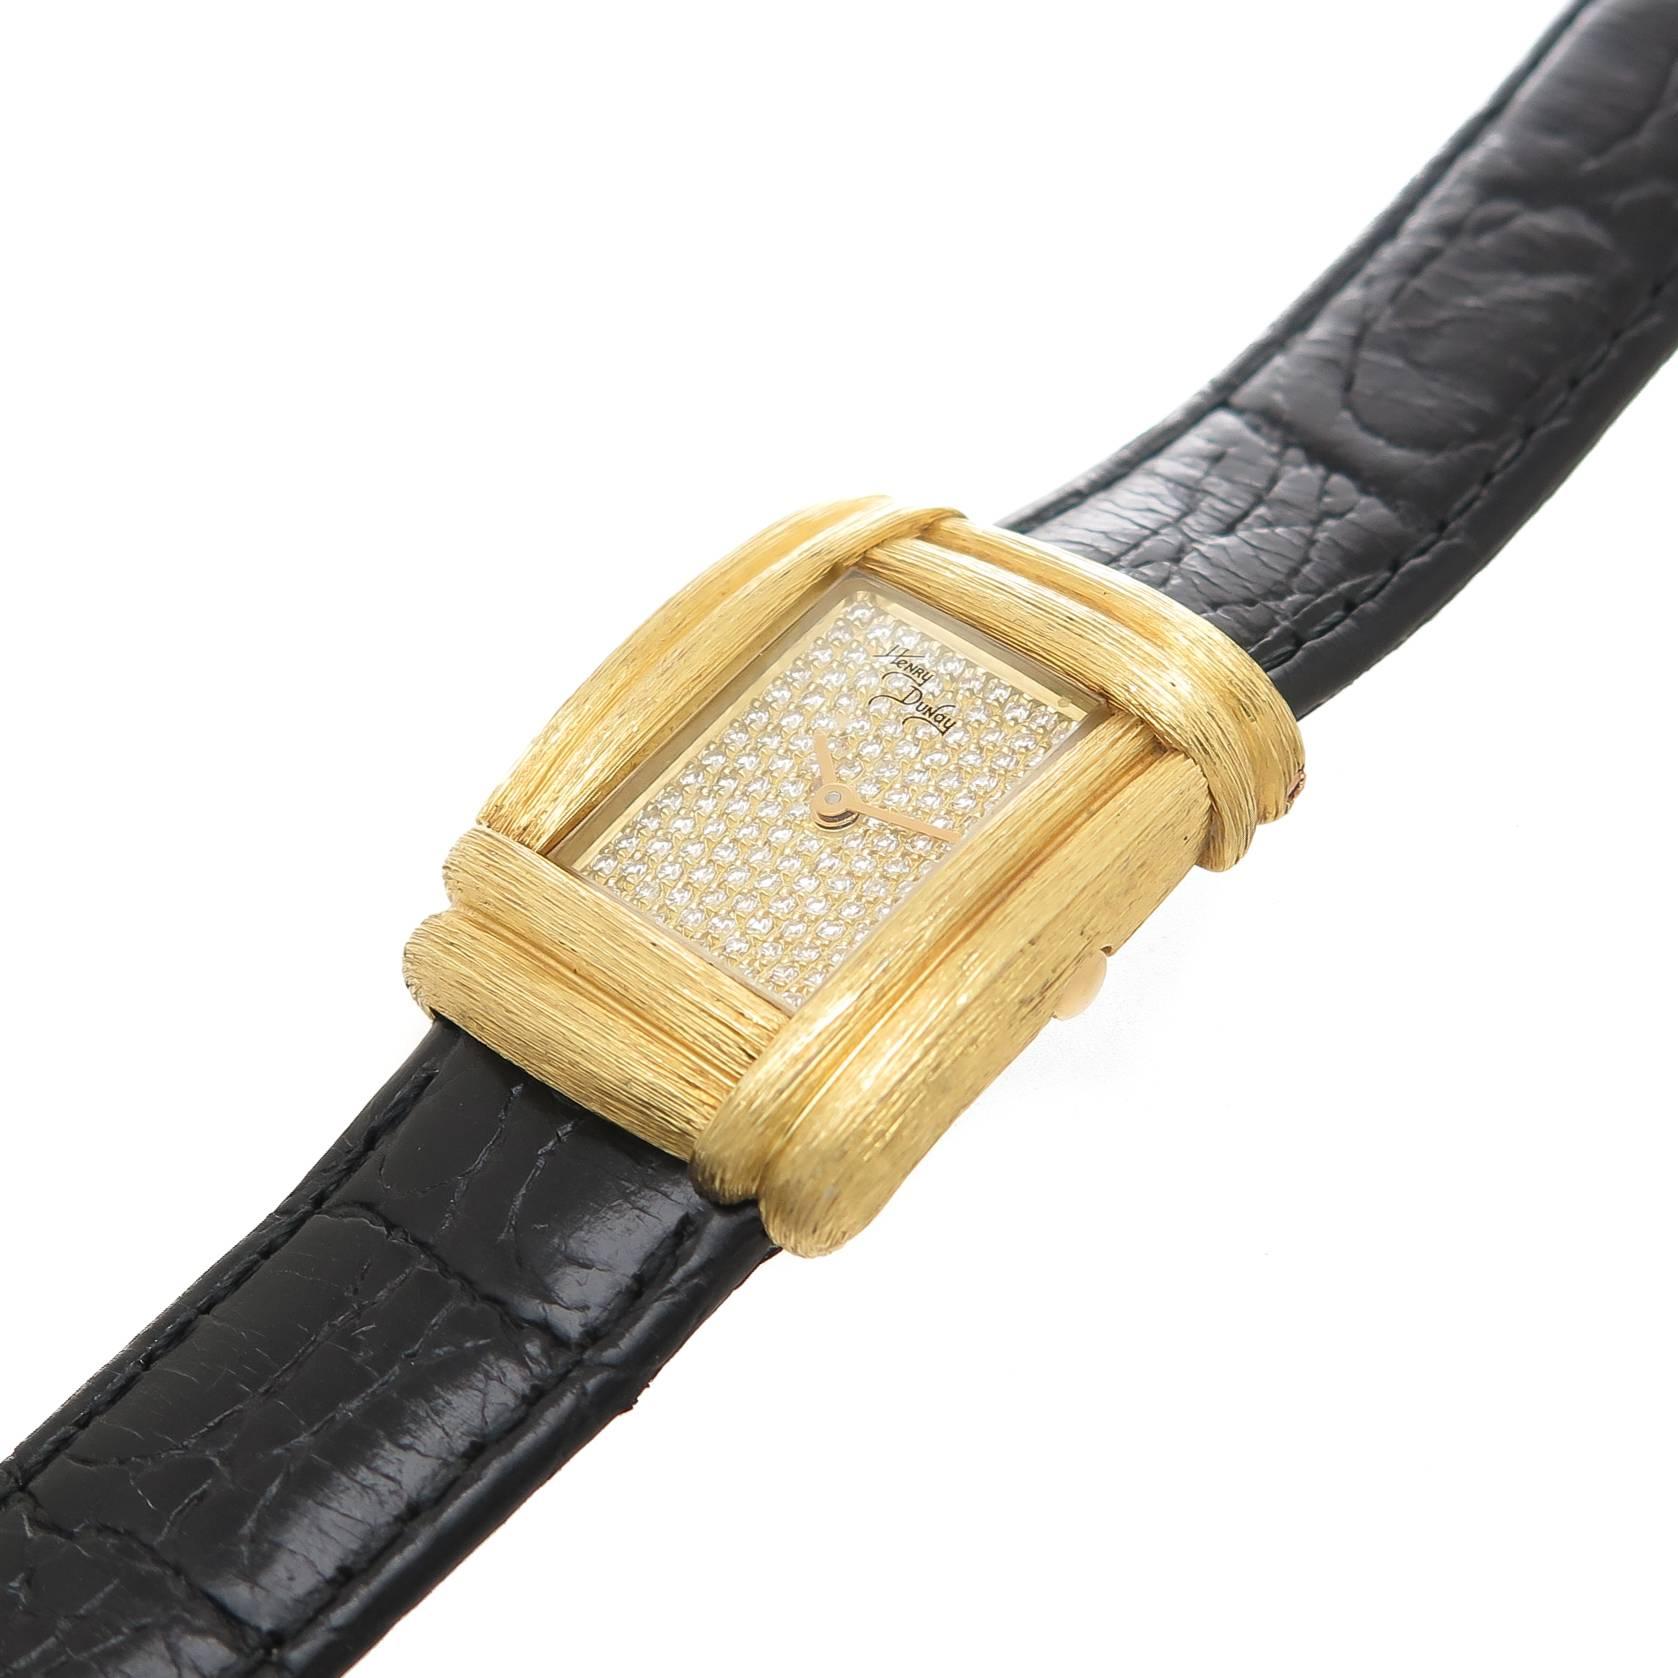 Circa 1990s henry Dunay ladies Wrist watch with Sabe finish, measuring 1 1/8 X 7/8 inch. Quartz Movement, Diamond pave Dial. Black leather Strap with 18k yellow Gold Dunay fold over Clasp, adjustable to fit most any wrist, recently serviced and